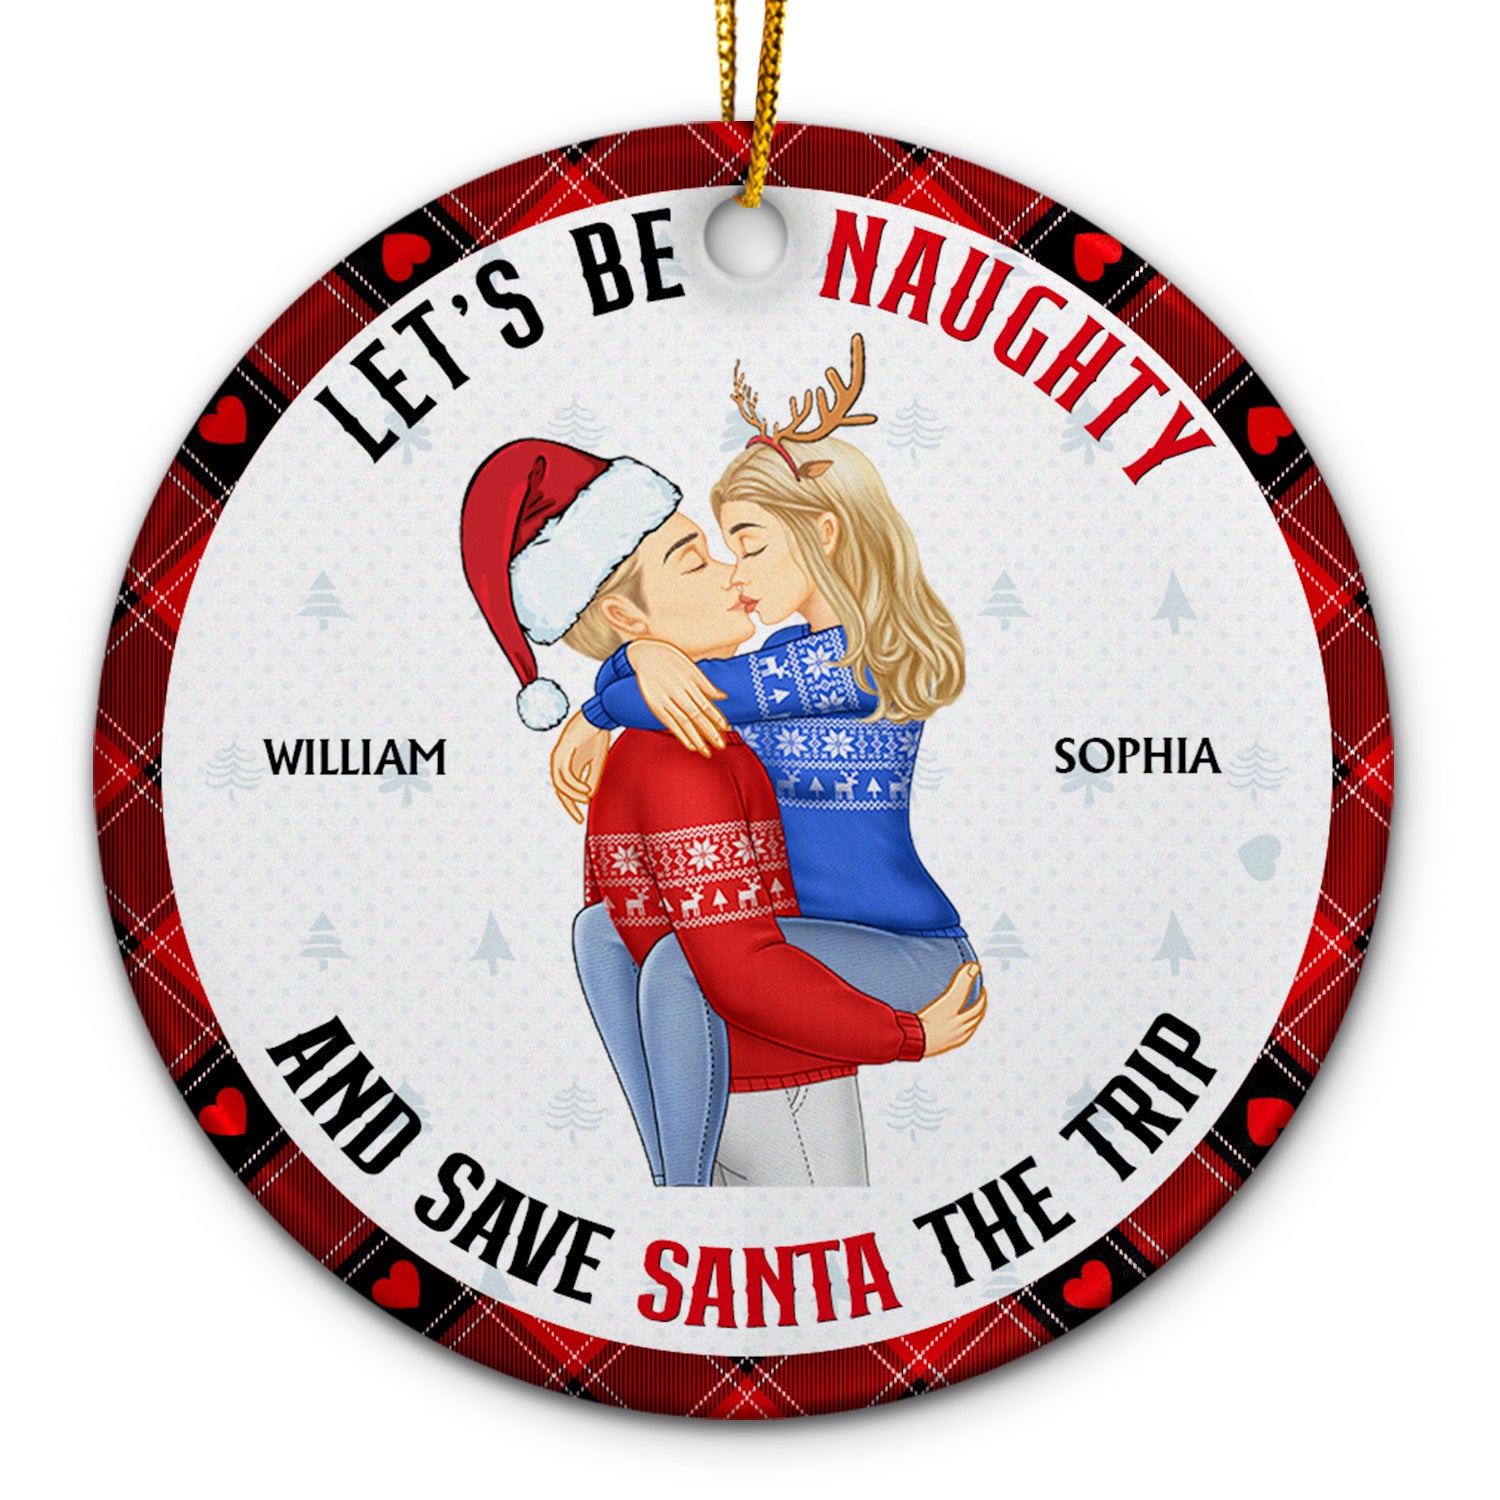 Let's Be Naughty - Anniversary, Christmas Gift For Couples, Family - Personalized Circle Ceramic Ornament